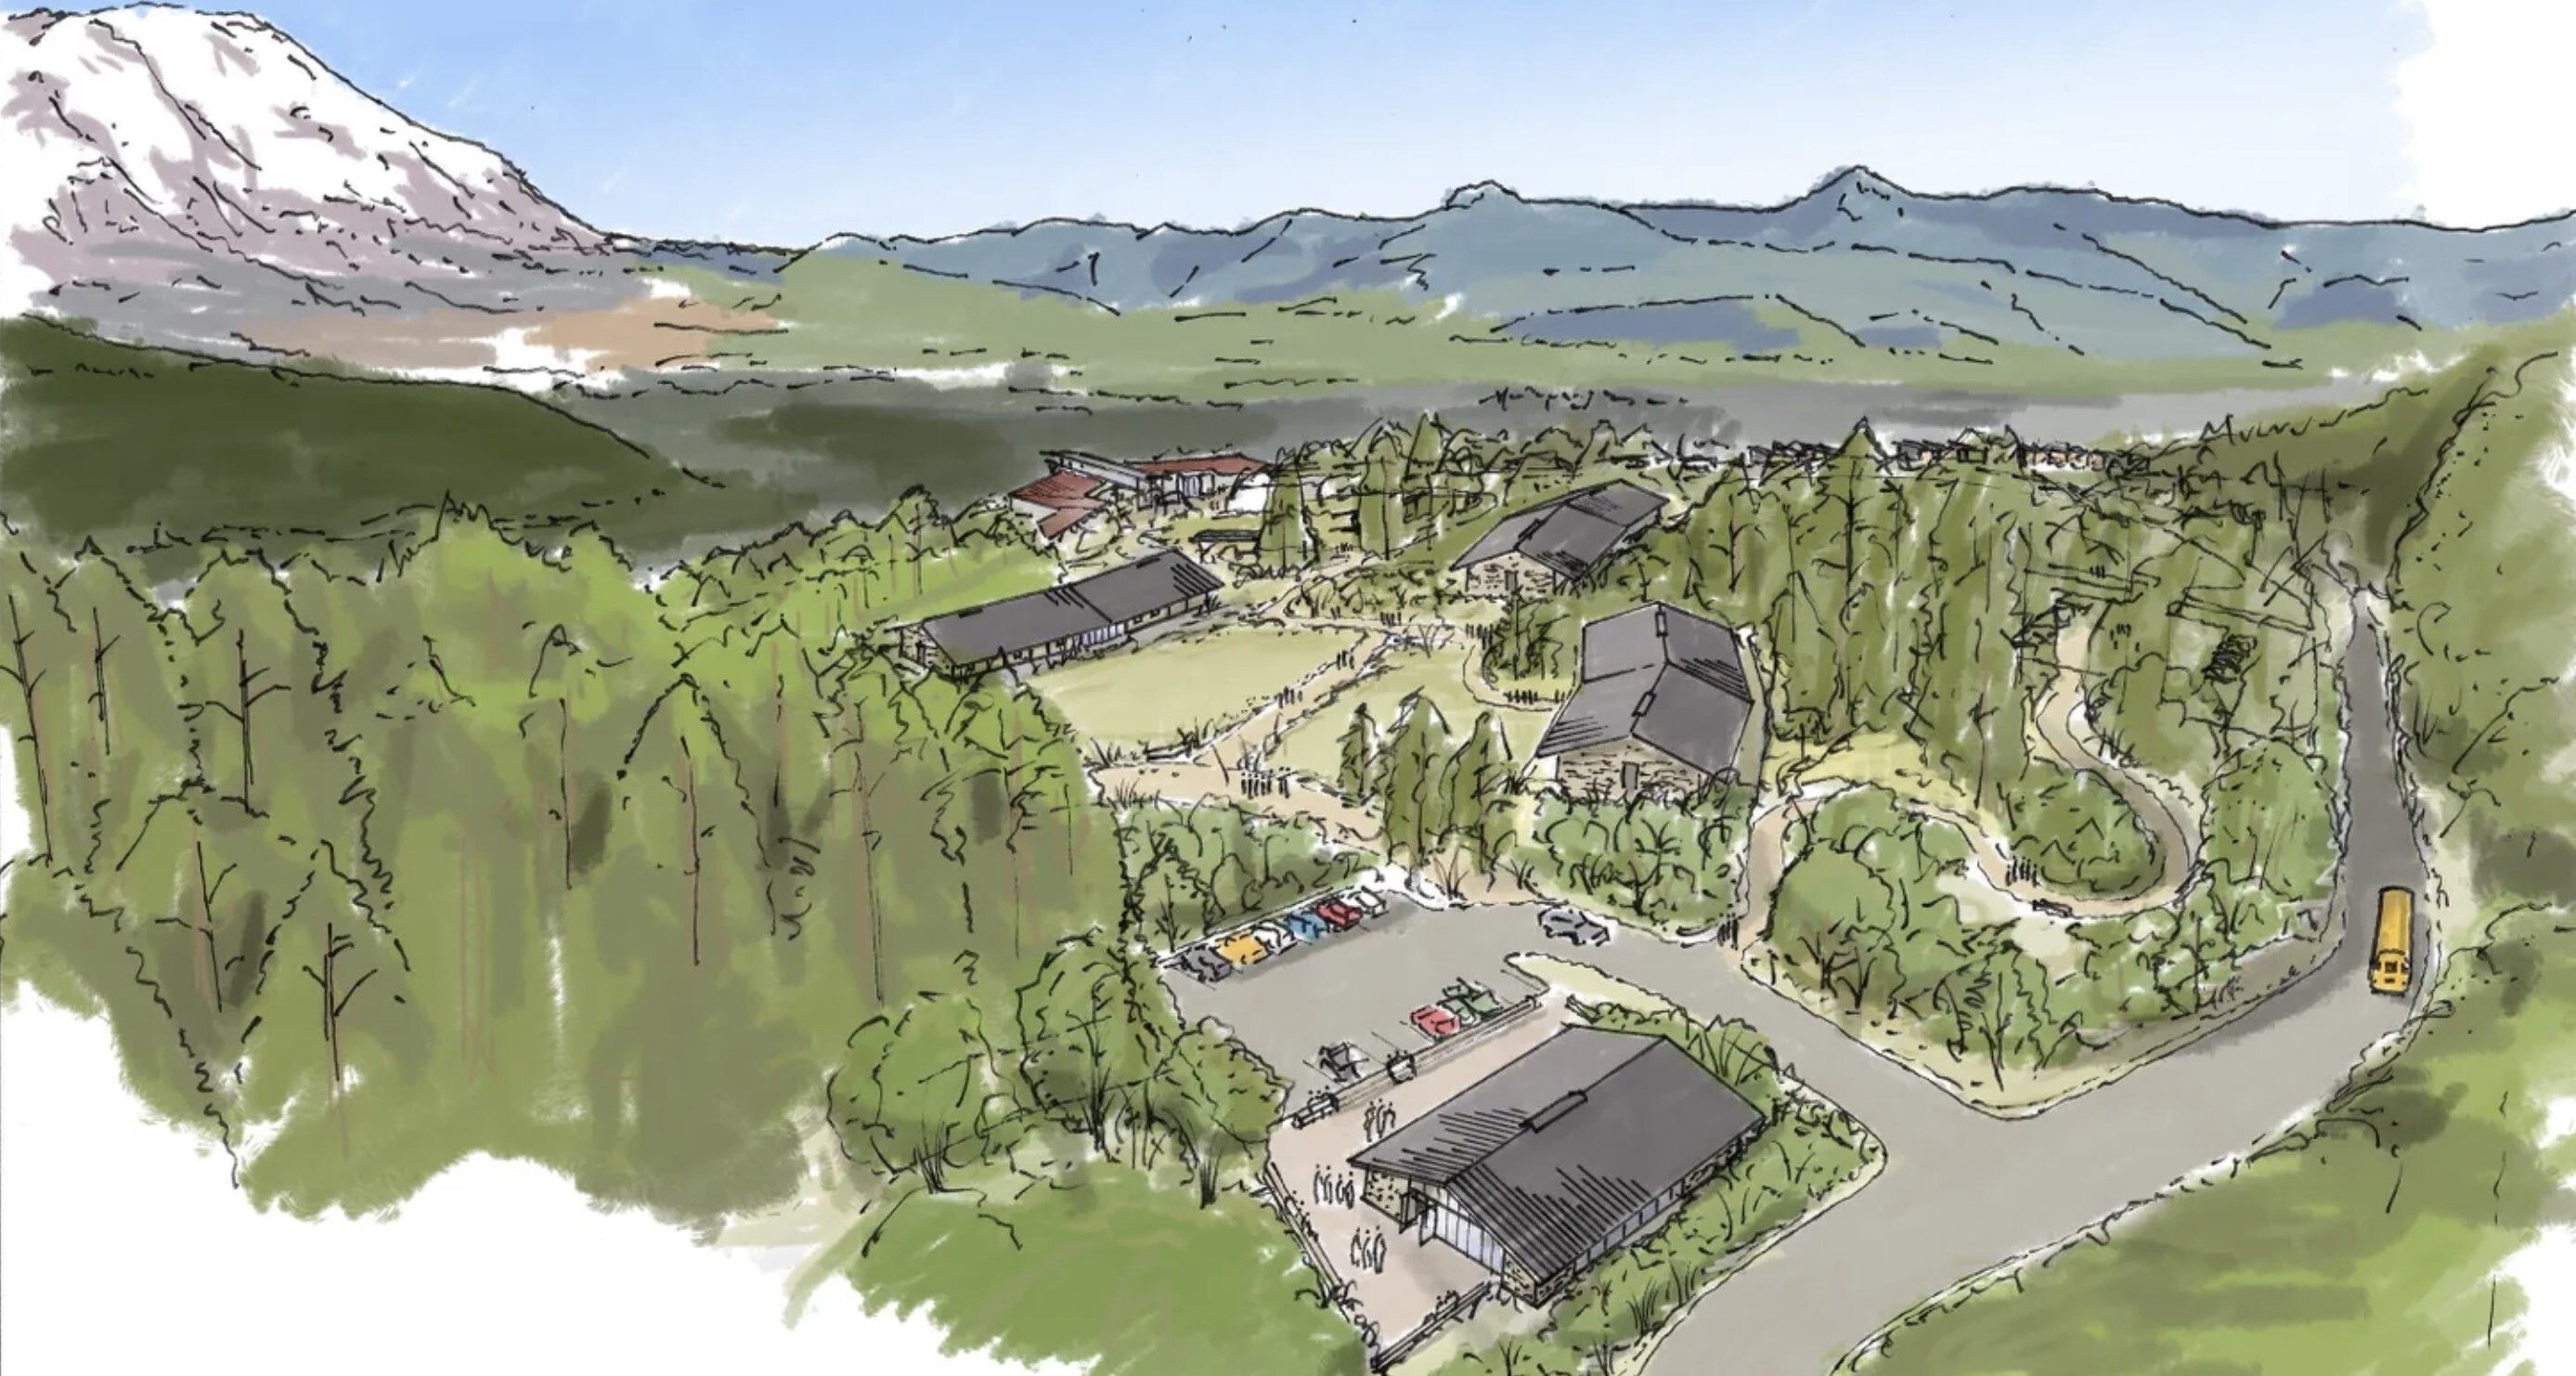 Mount St. Helens Lodge & Education Center Coming Soon